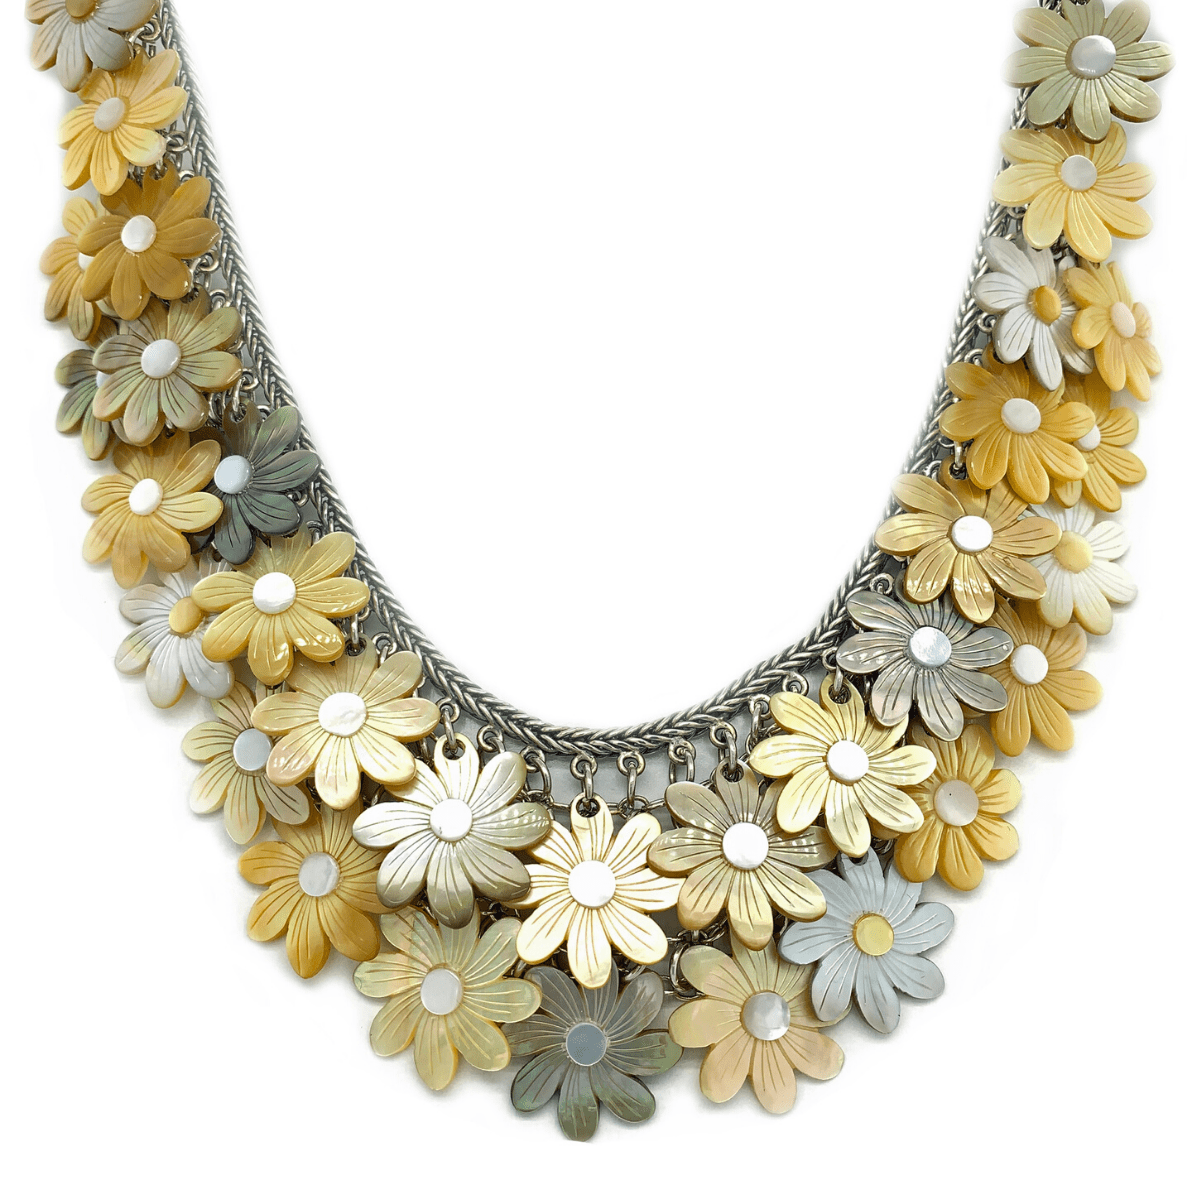 Mother-of-Pearl Daisies & Sterling Silver Mesh Necklace - Qinti - The Peruvian Shop